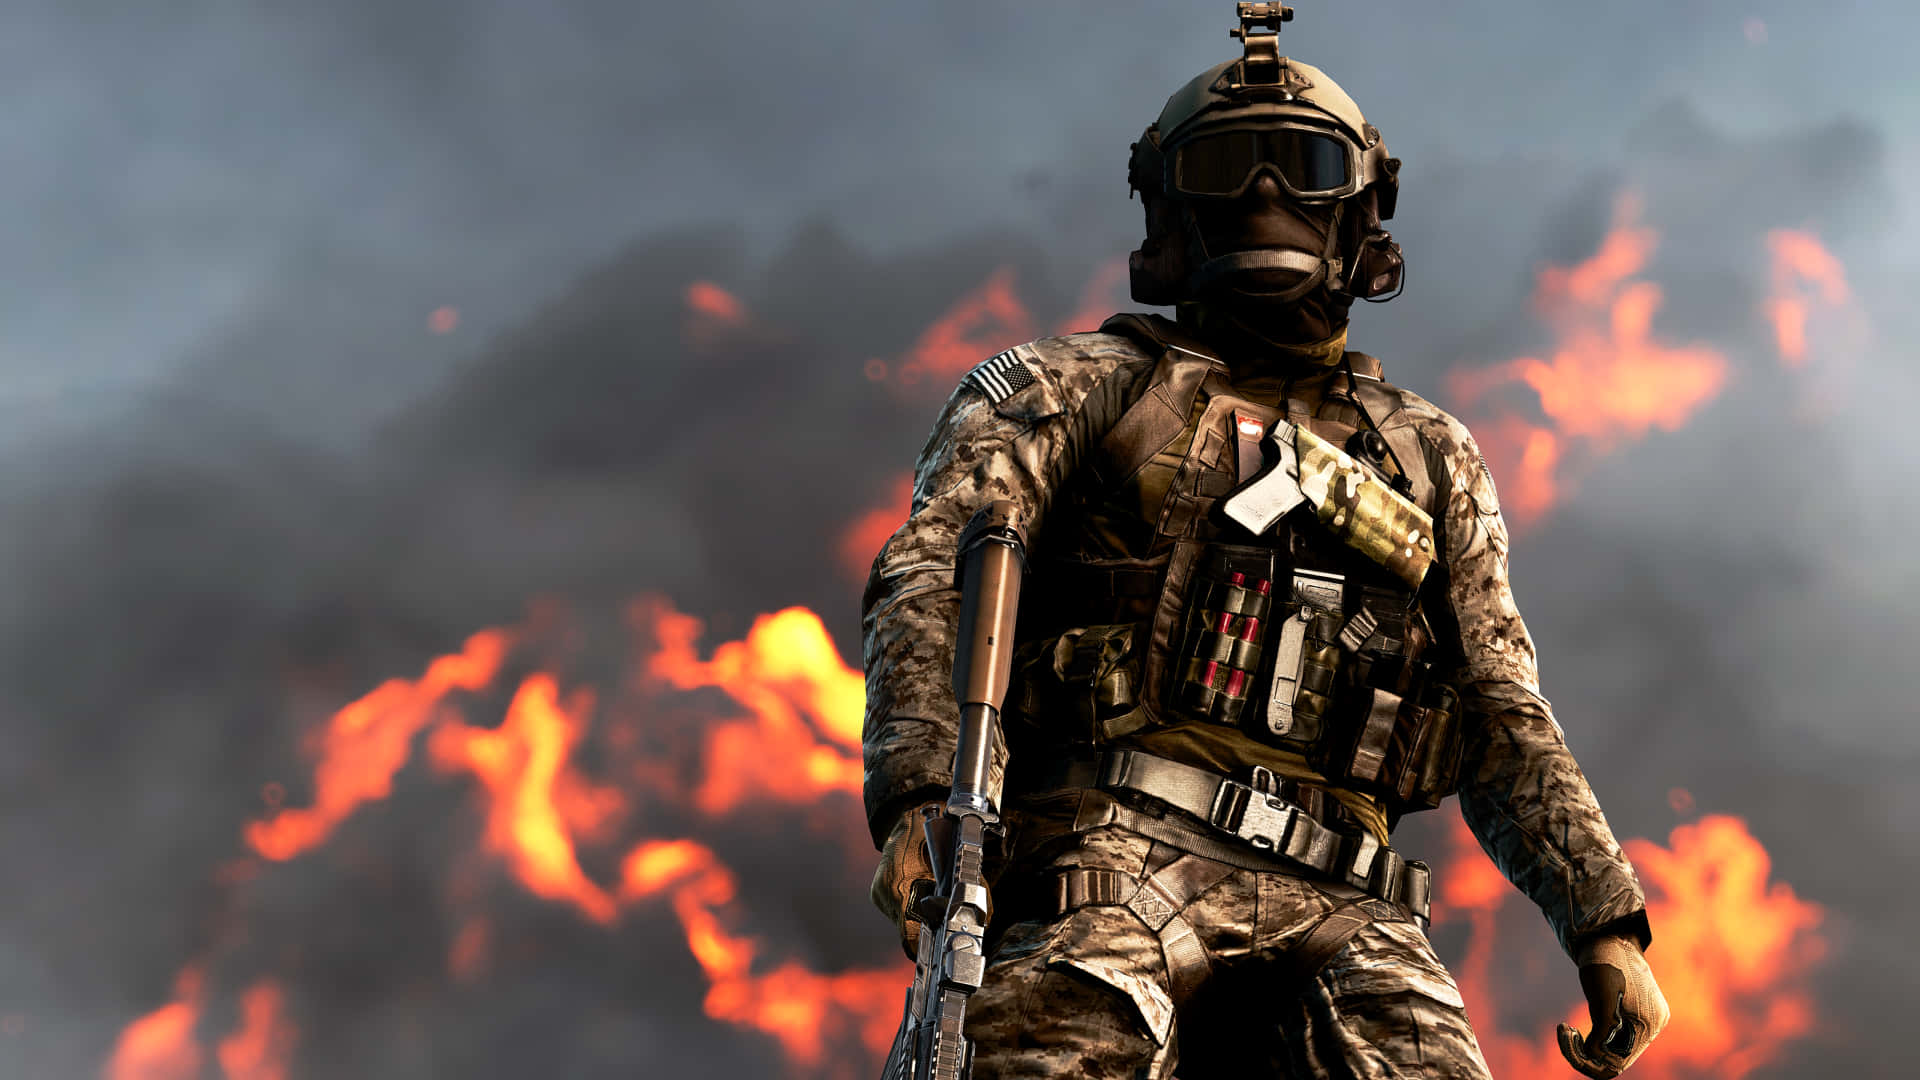 Aim for Victory in Battlefield 4